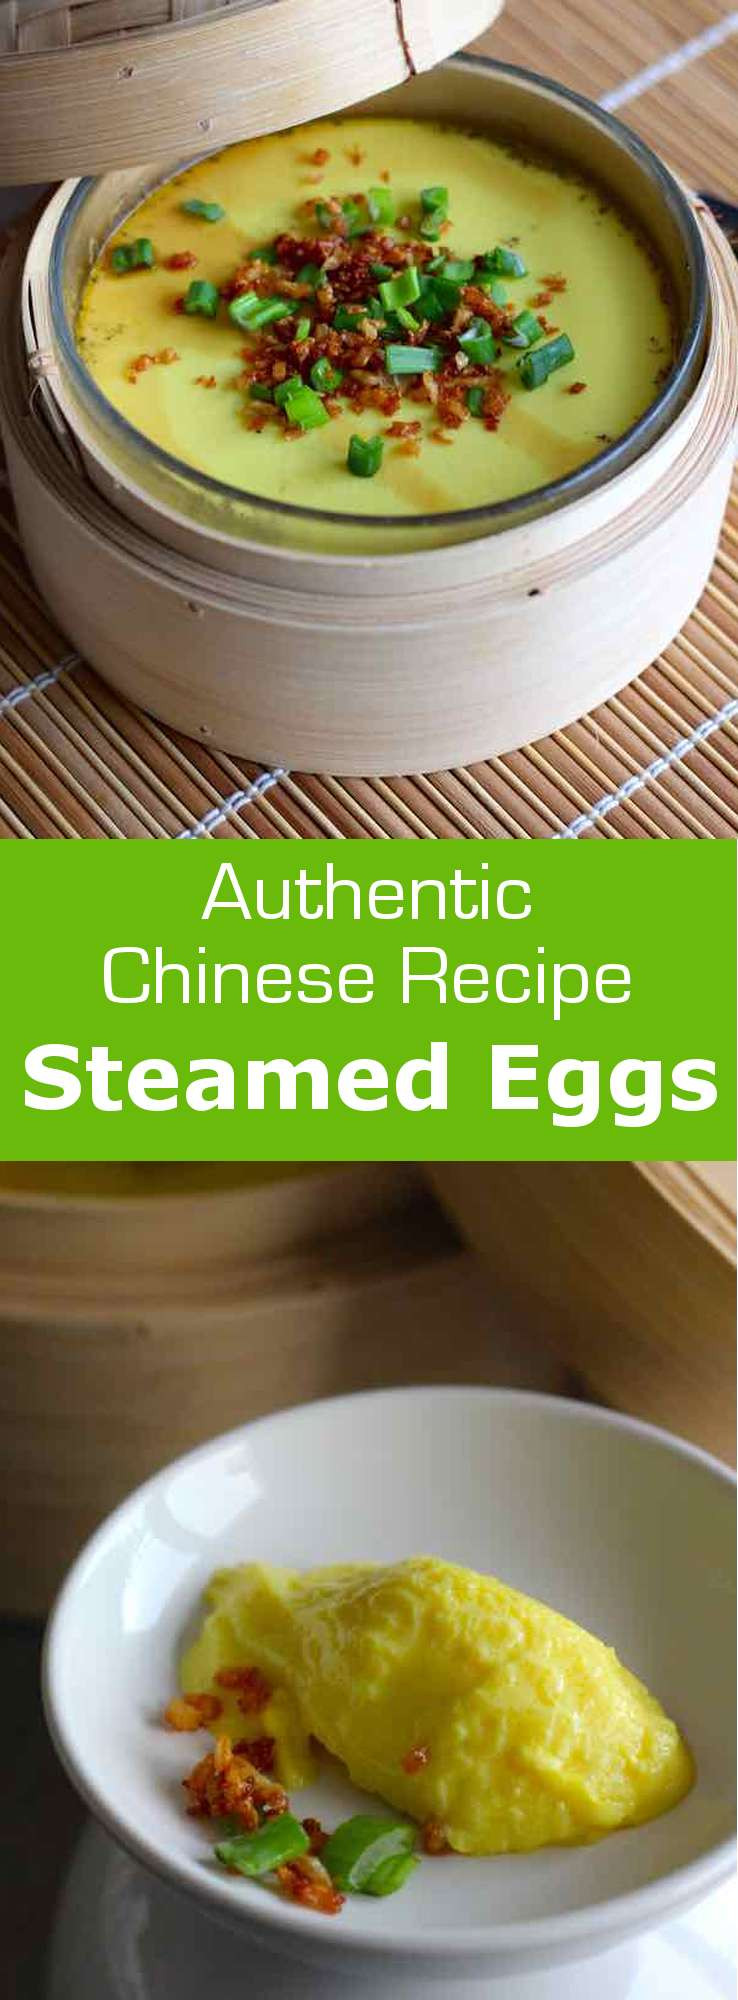 Chinese Steamed Egg Recipes
 Steamed Eggs Traditional Chinese Recipe